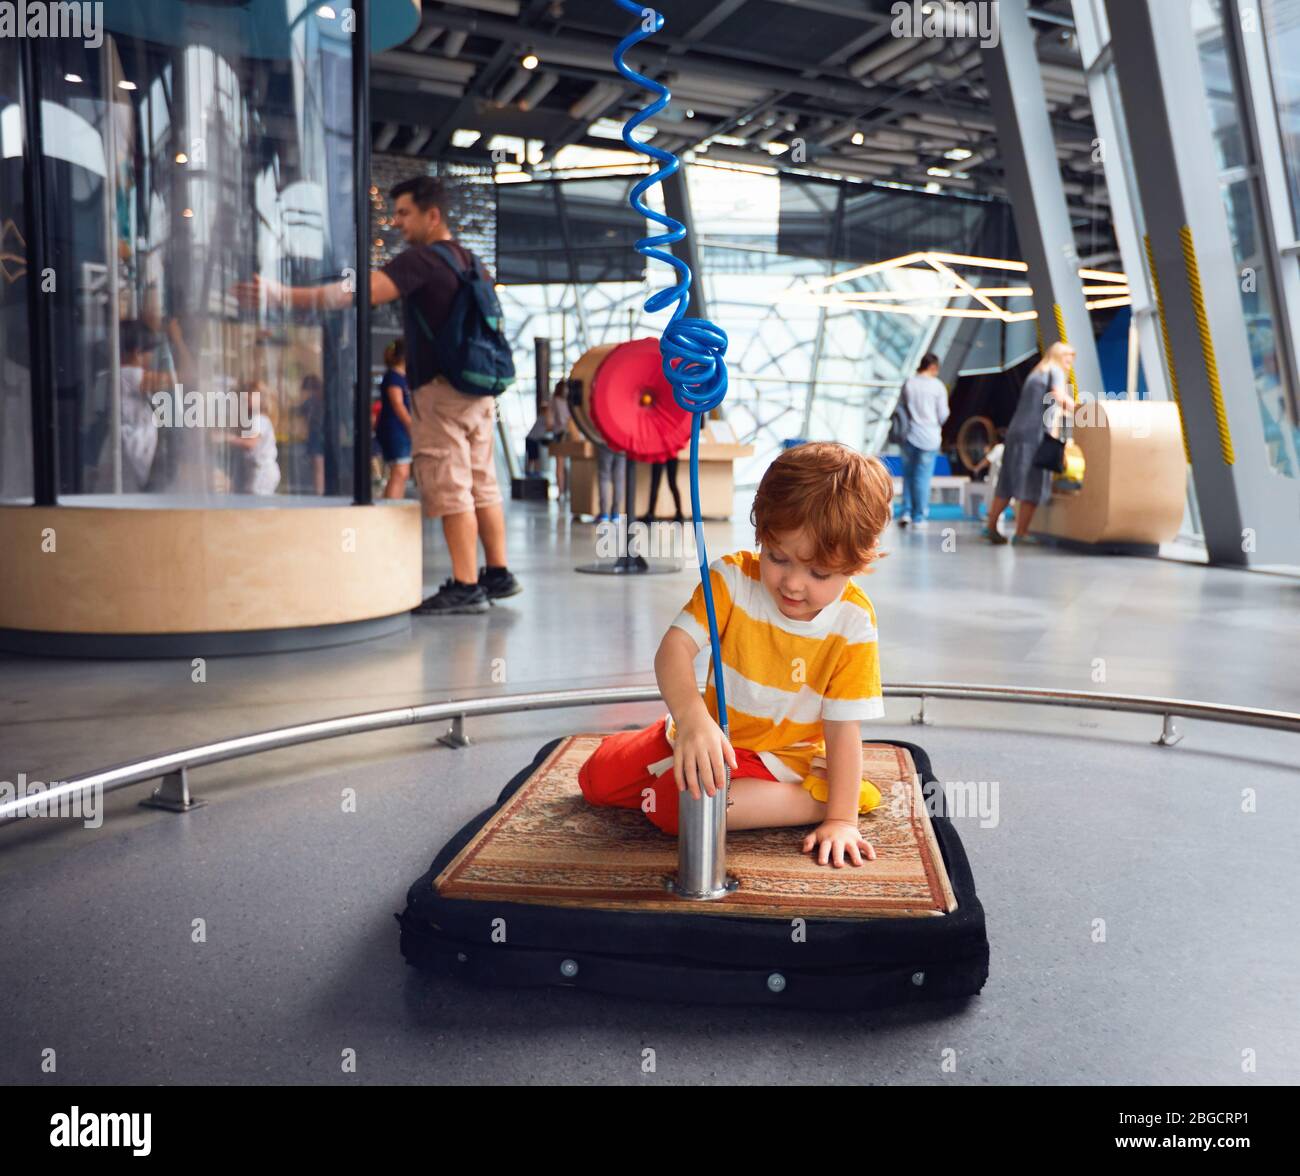 WARSAW, POLAND - June 20, 2019: Curious kid exploring the floating features of rug in combination with the air pump at the Copernicus Science Centre i Stock Photo